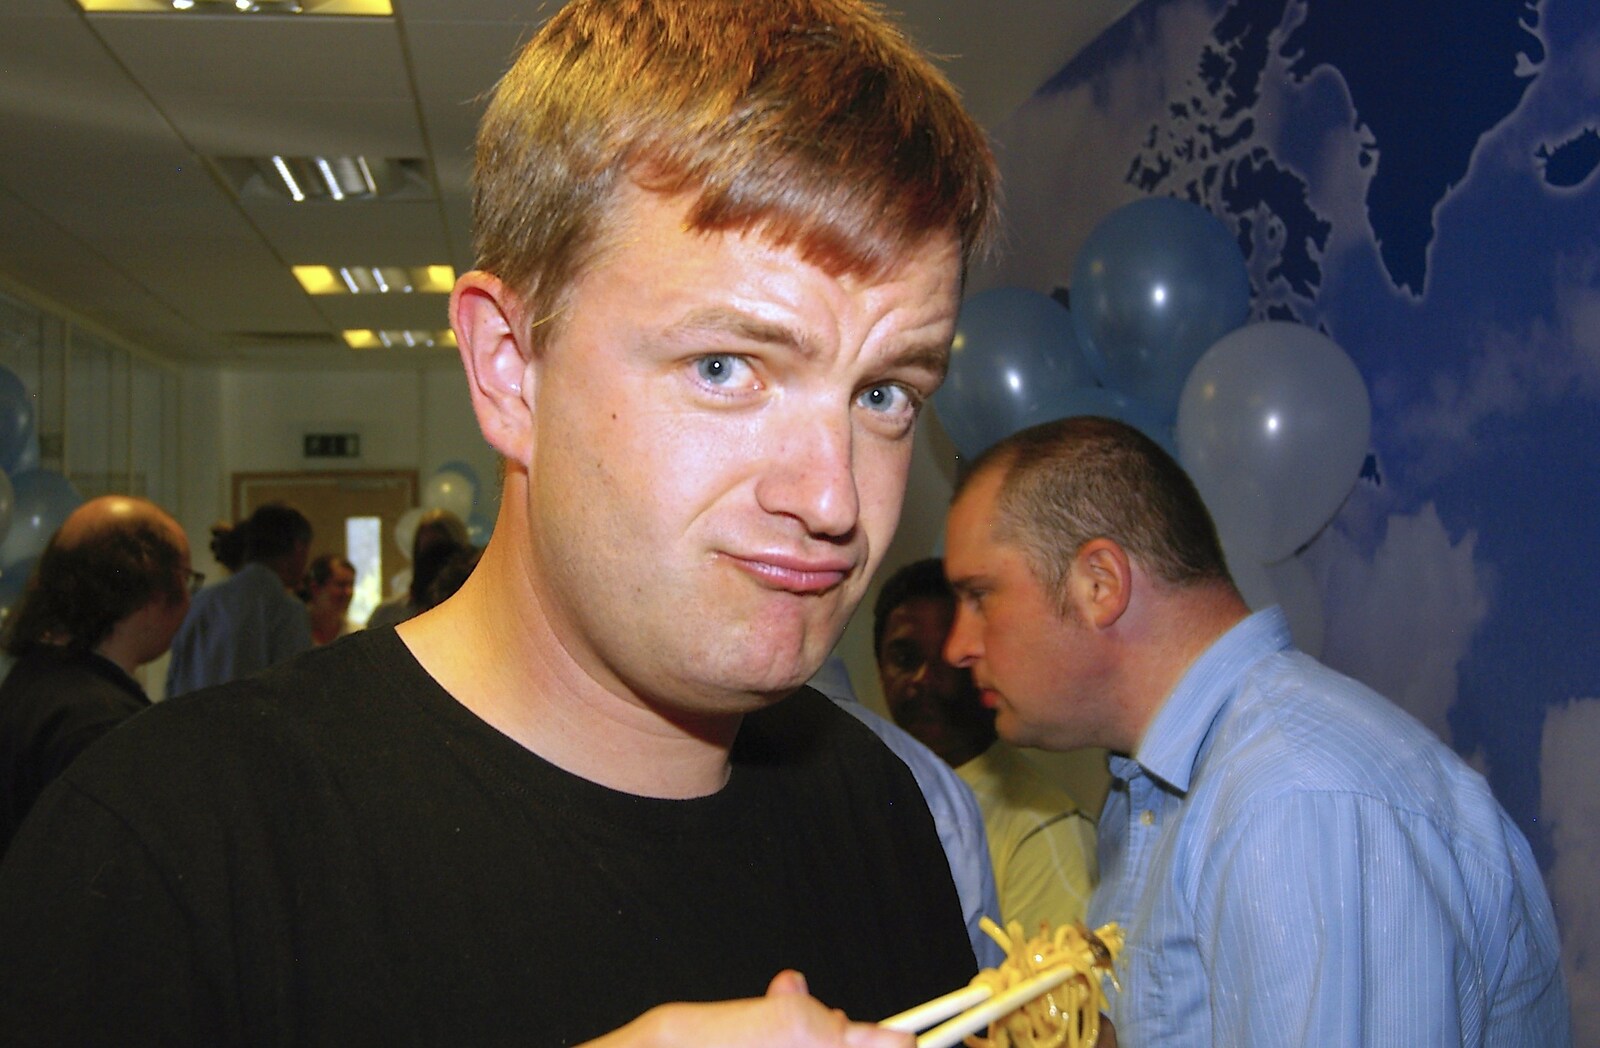 Nosher's got noodles on chopsticks from Qualcomm's New Office Party, Science Park, Milton Road, Cambridge - 3rd July 2006